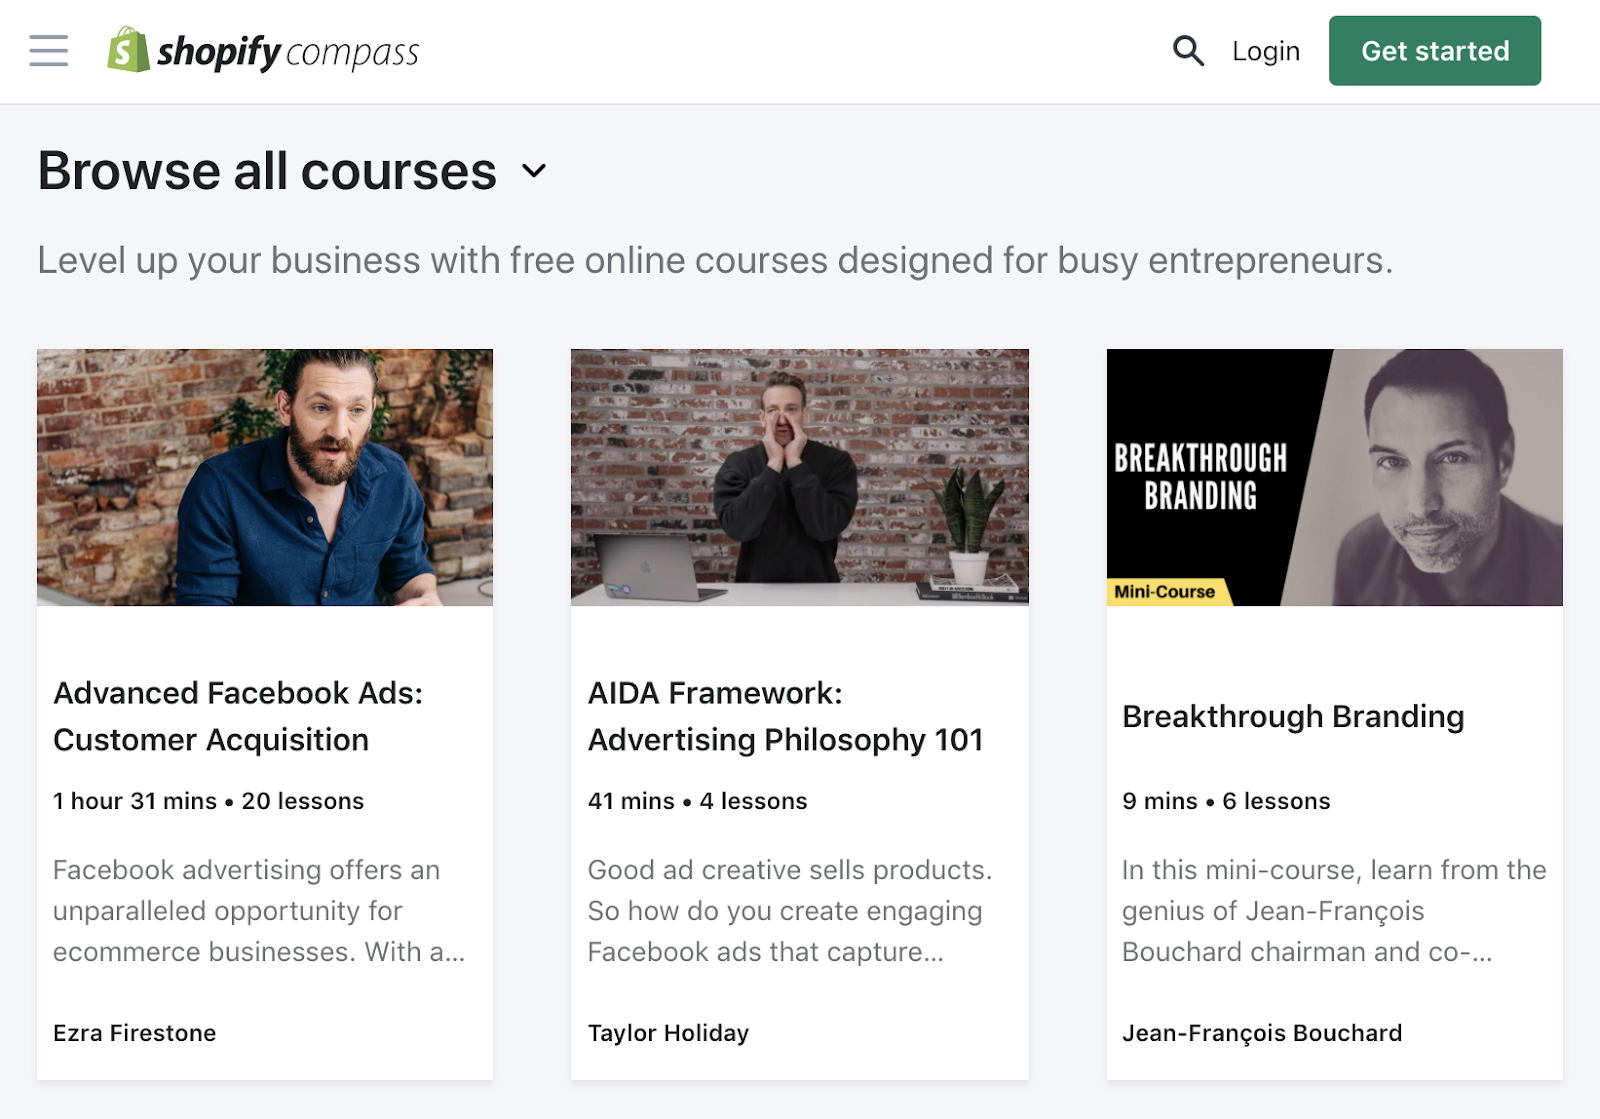 Most Profitable Small Businesses: Learn Web Design with Shopify Compass